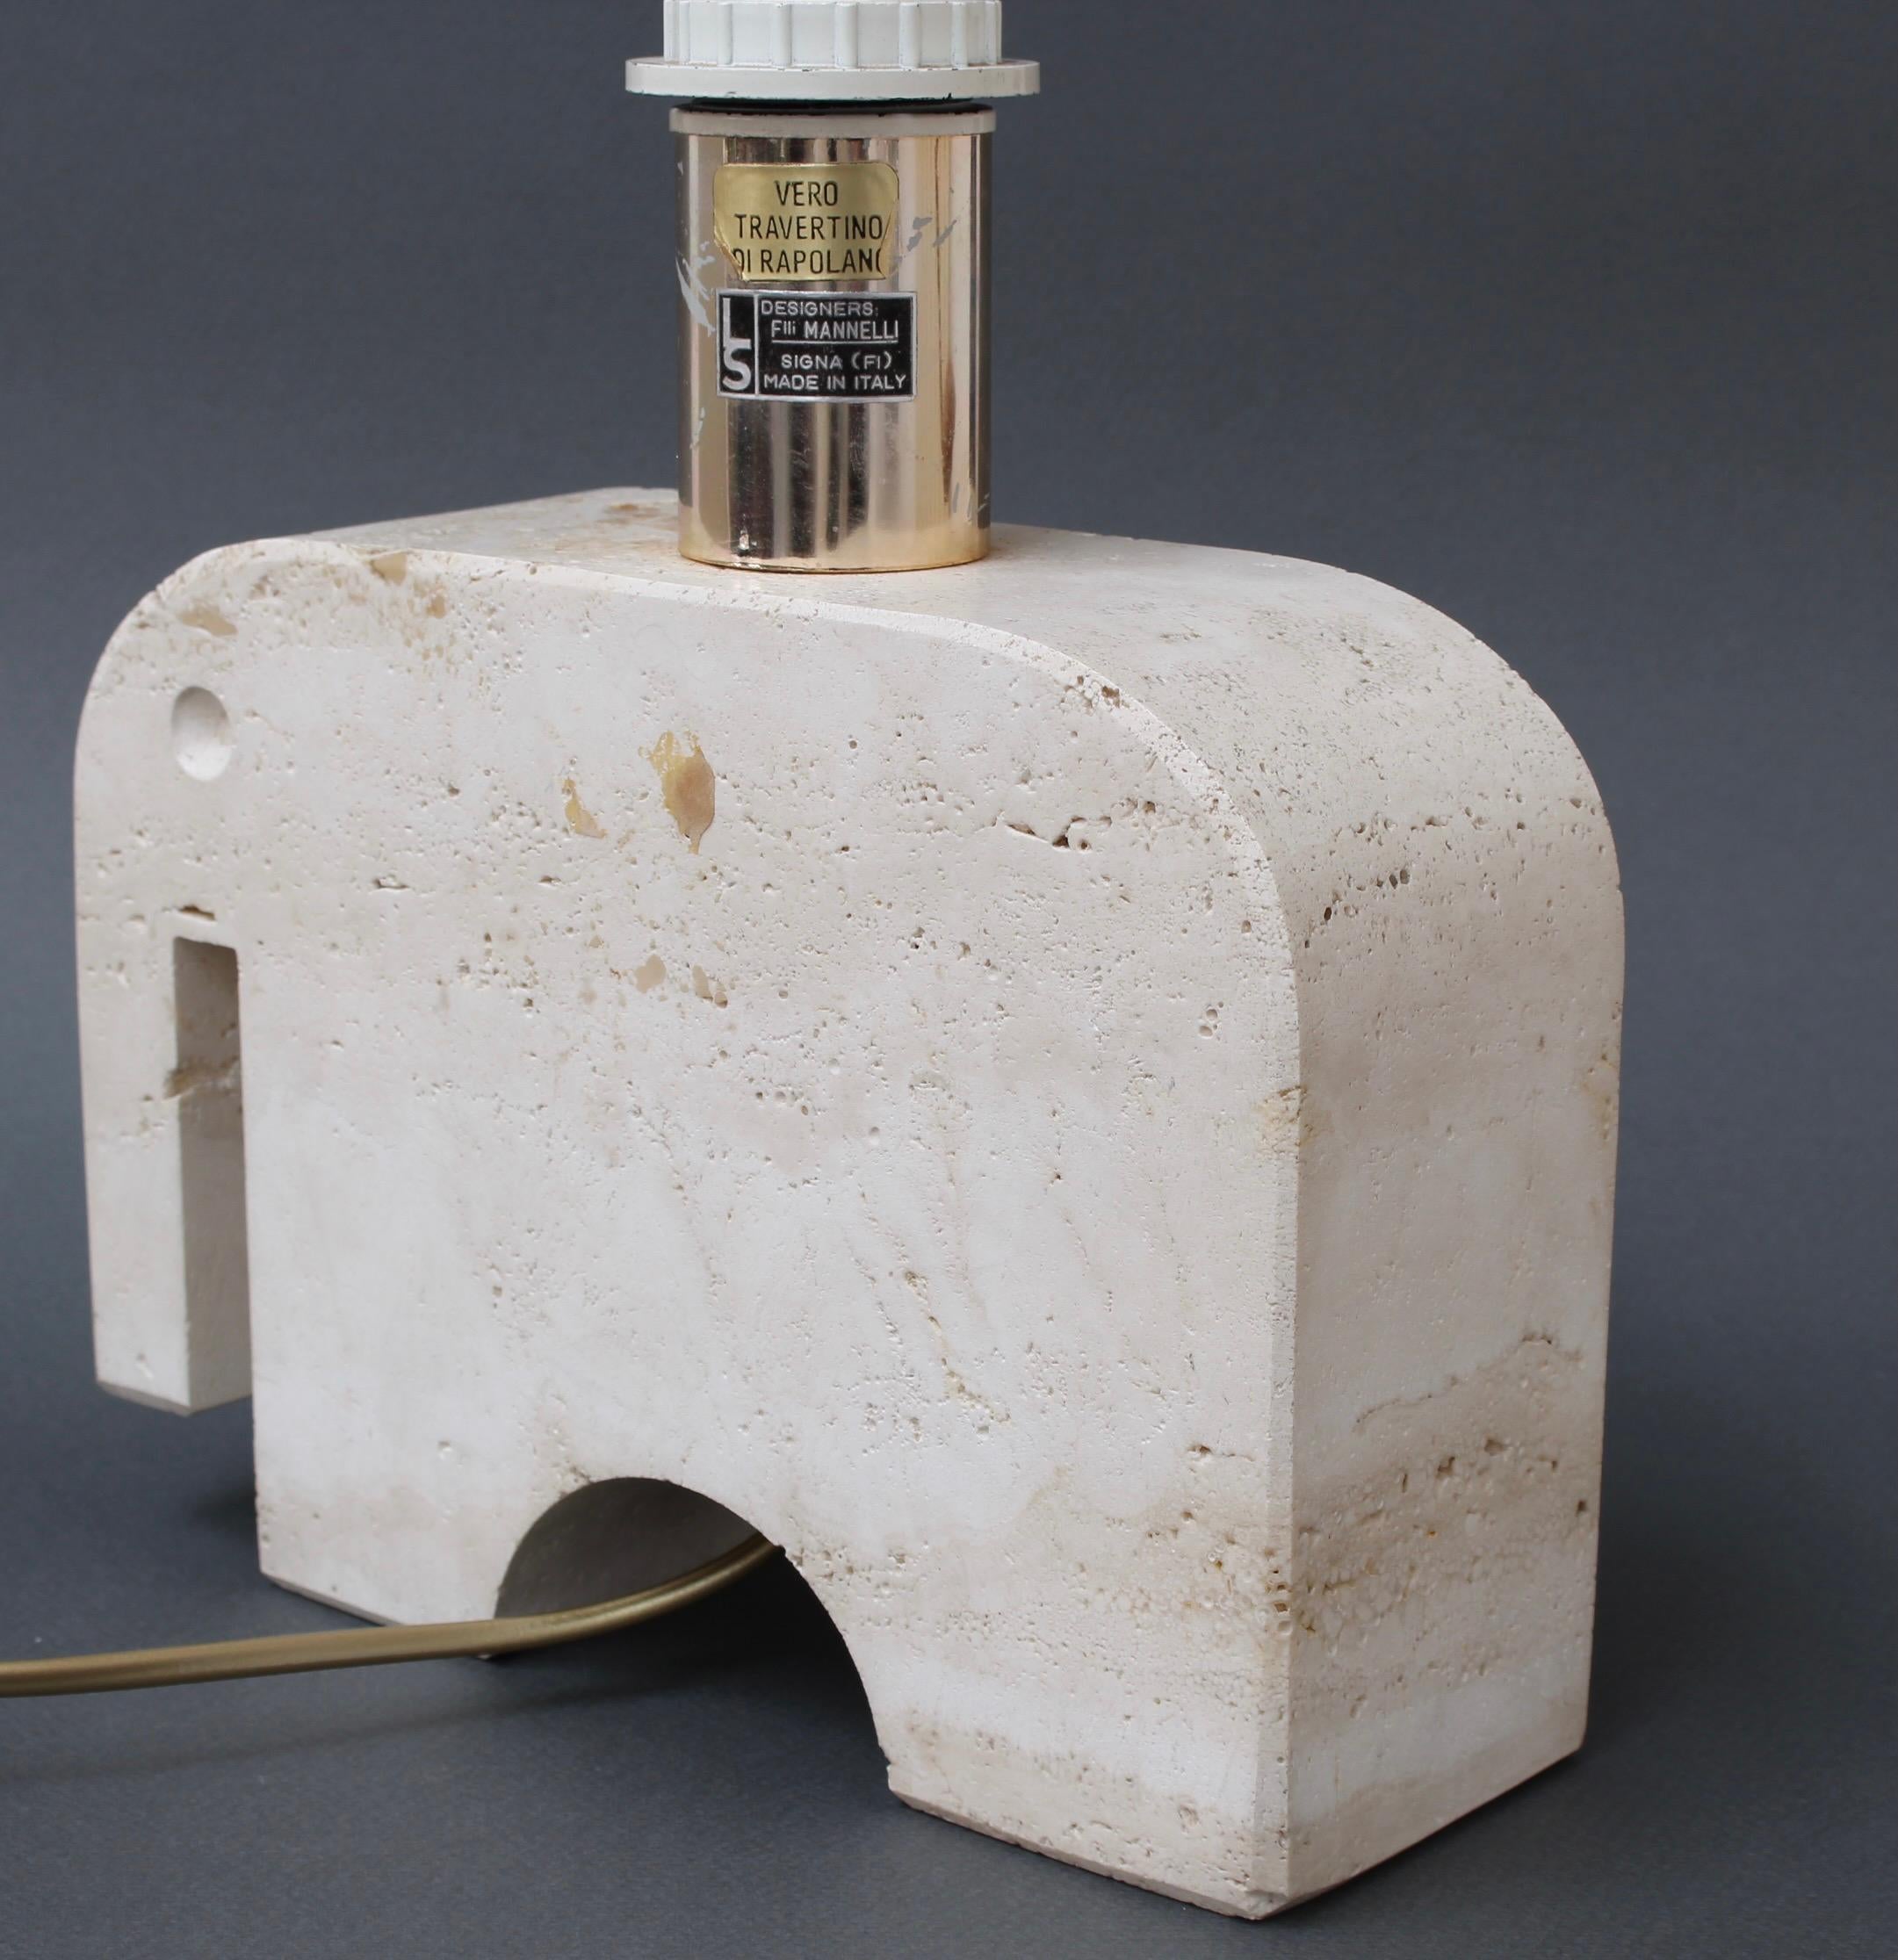 Vintage Italian Travertine Elephant Table Lamp by Mannelli Bros 'circa 1970s' For Sale 3